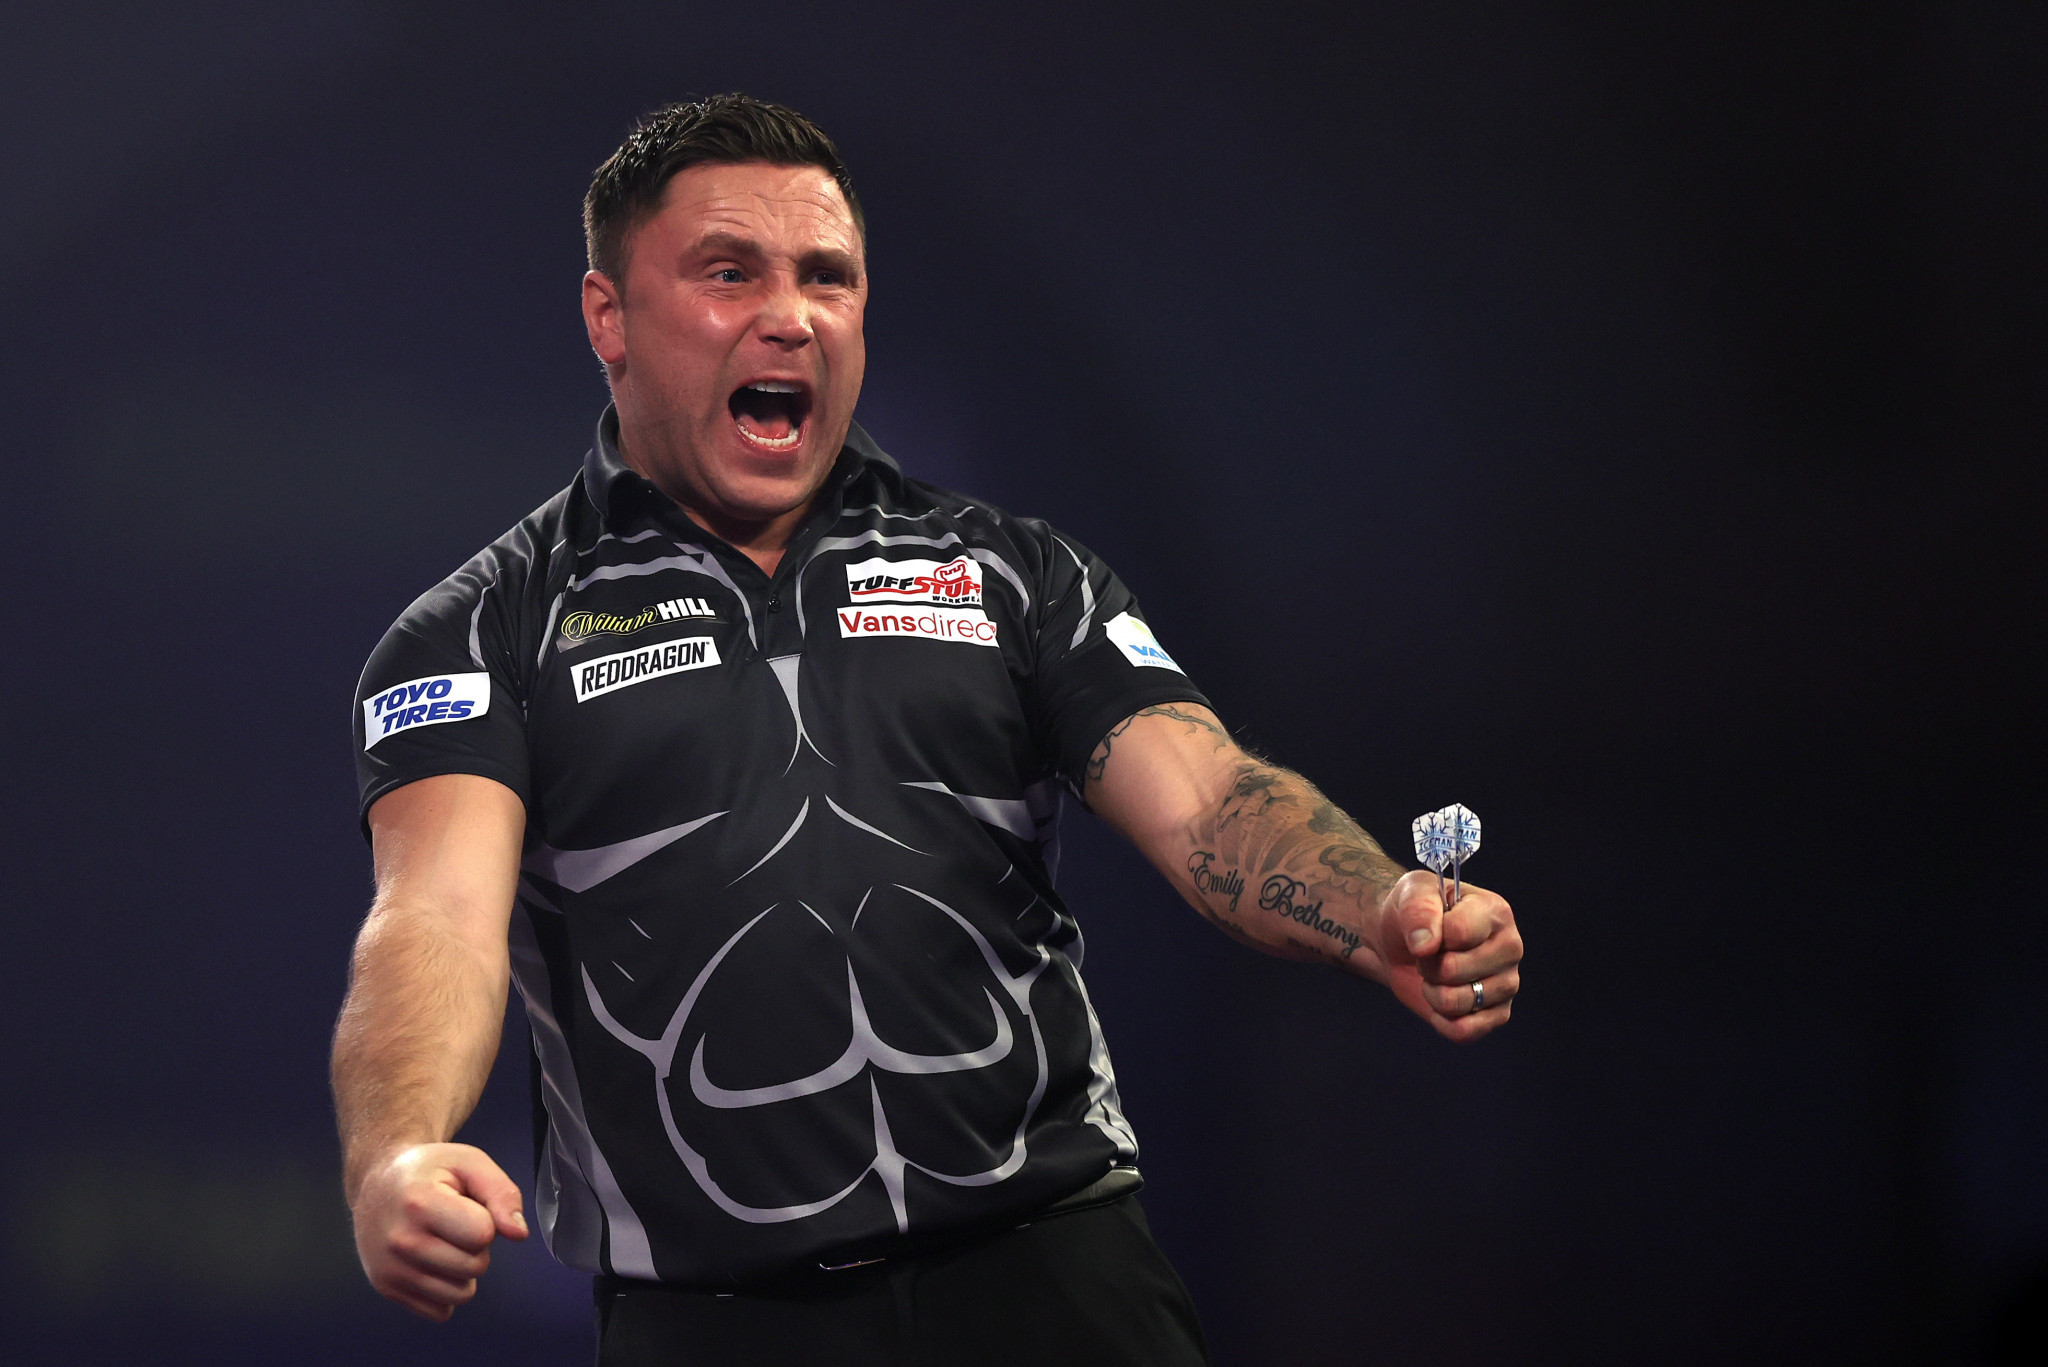 Price and Clayton look to defend Welsh title at PDC World Cup of Darts